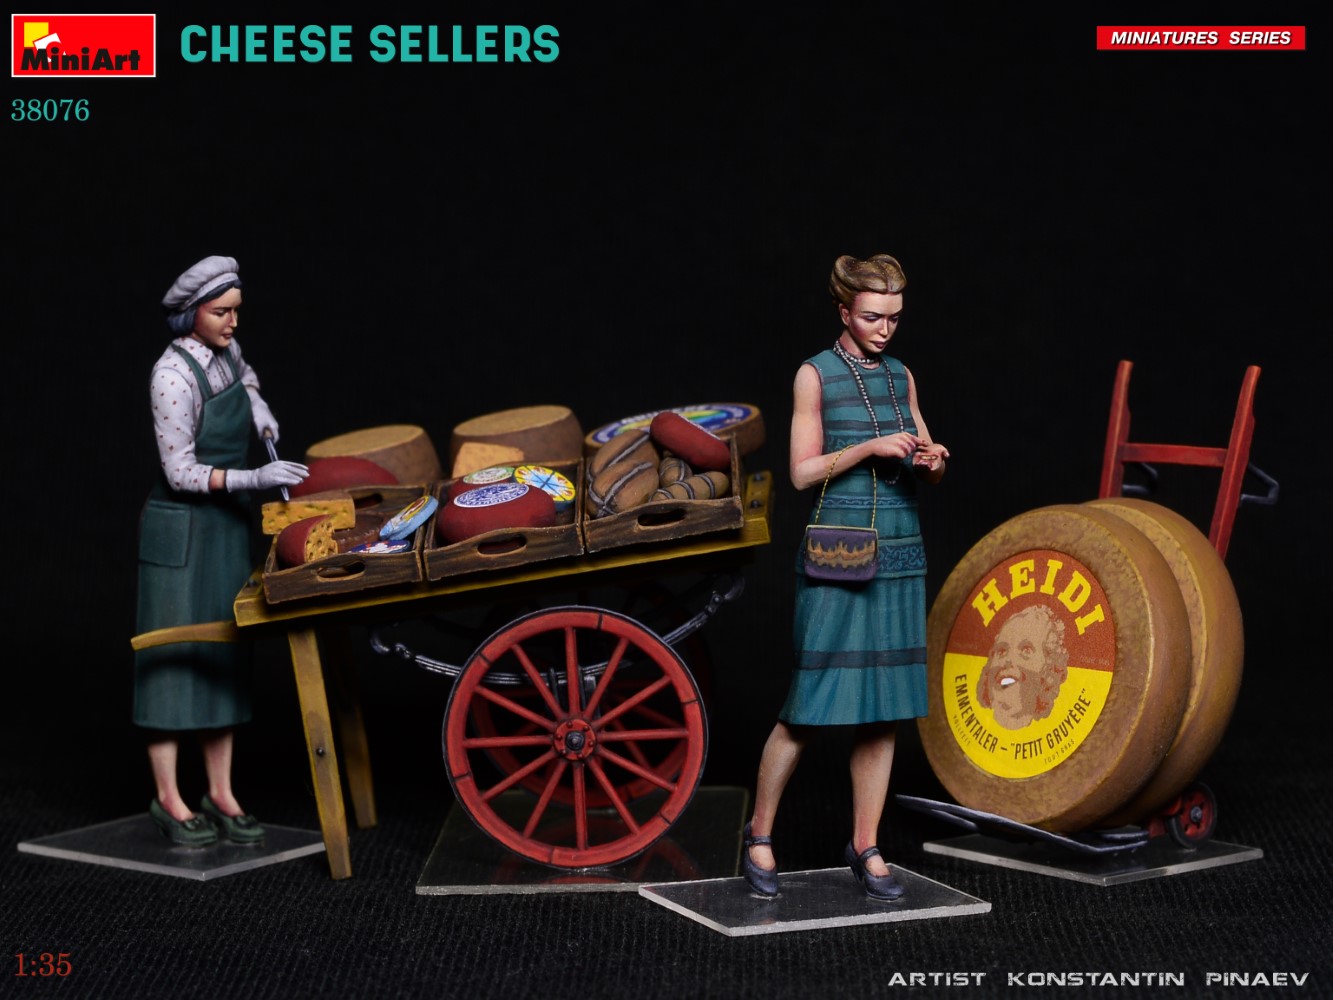 Miniart 1/35 Cheese Sellers # 38076